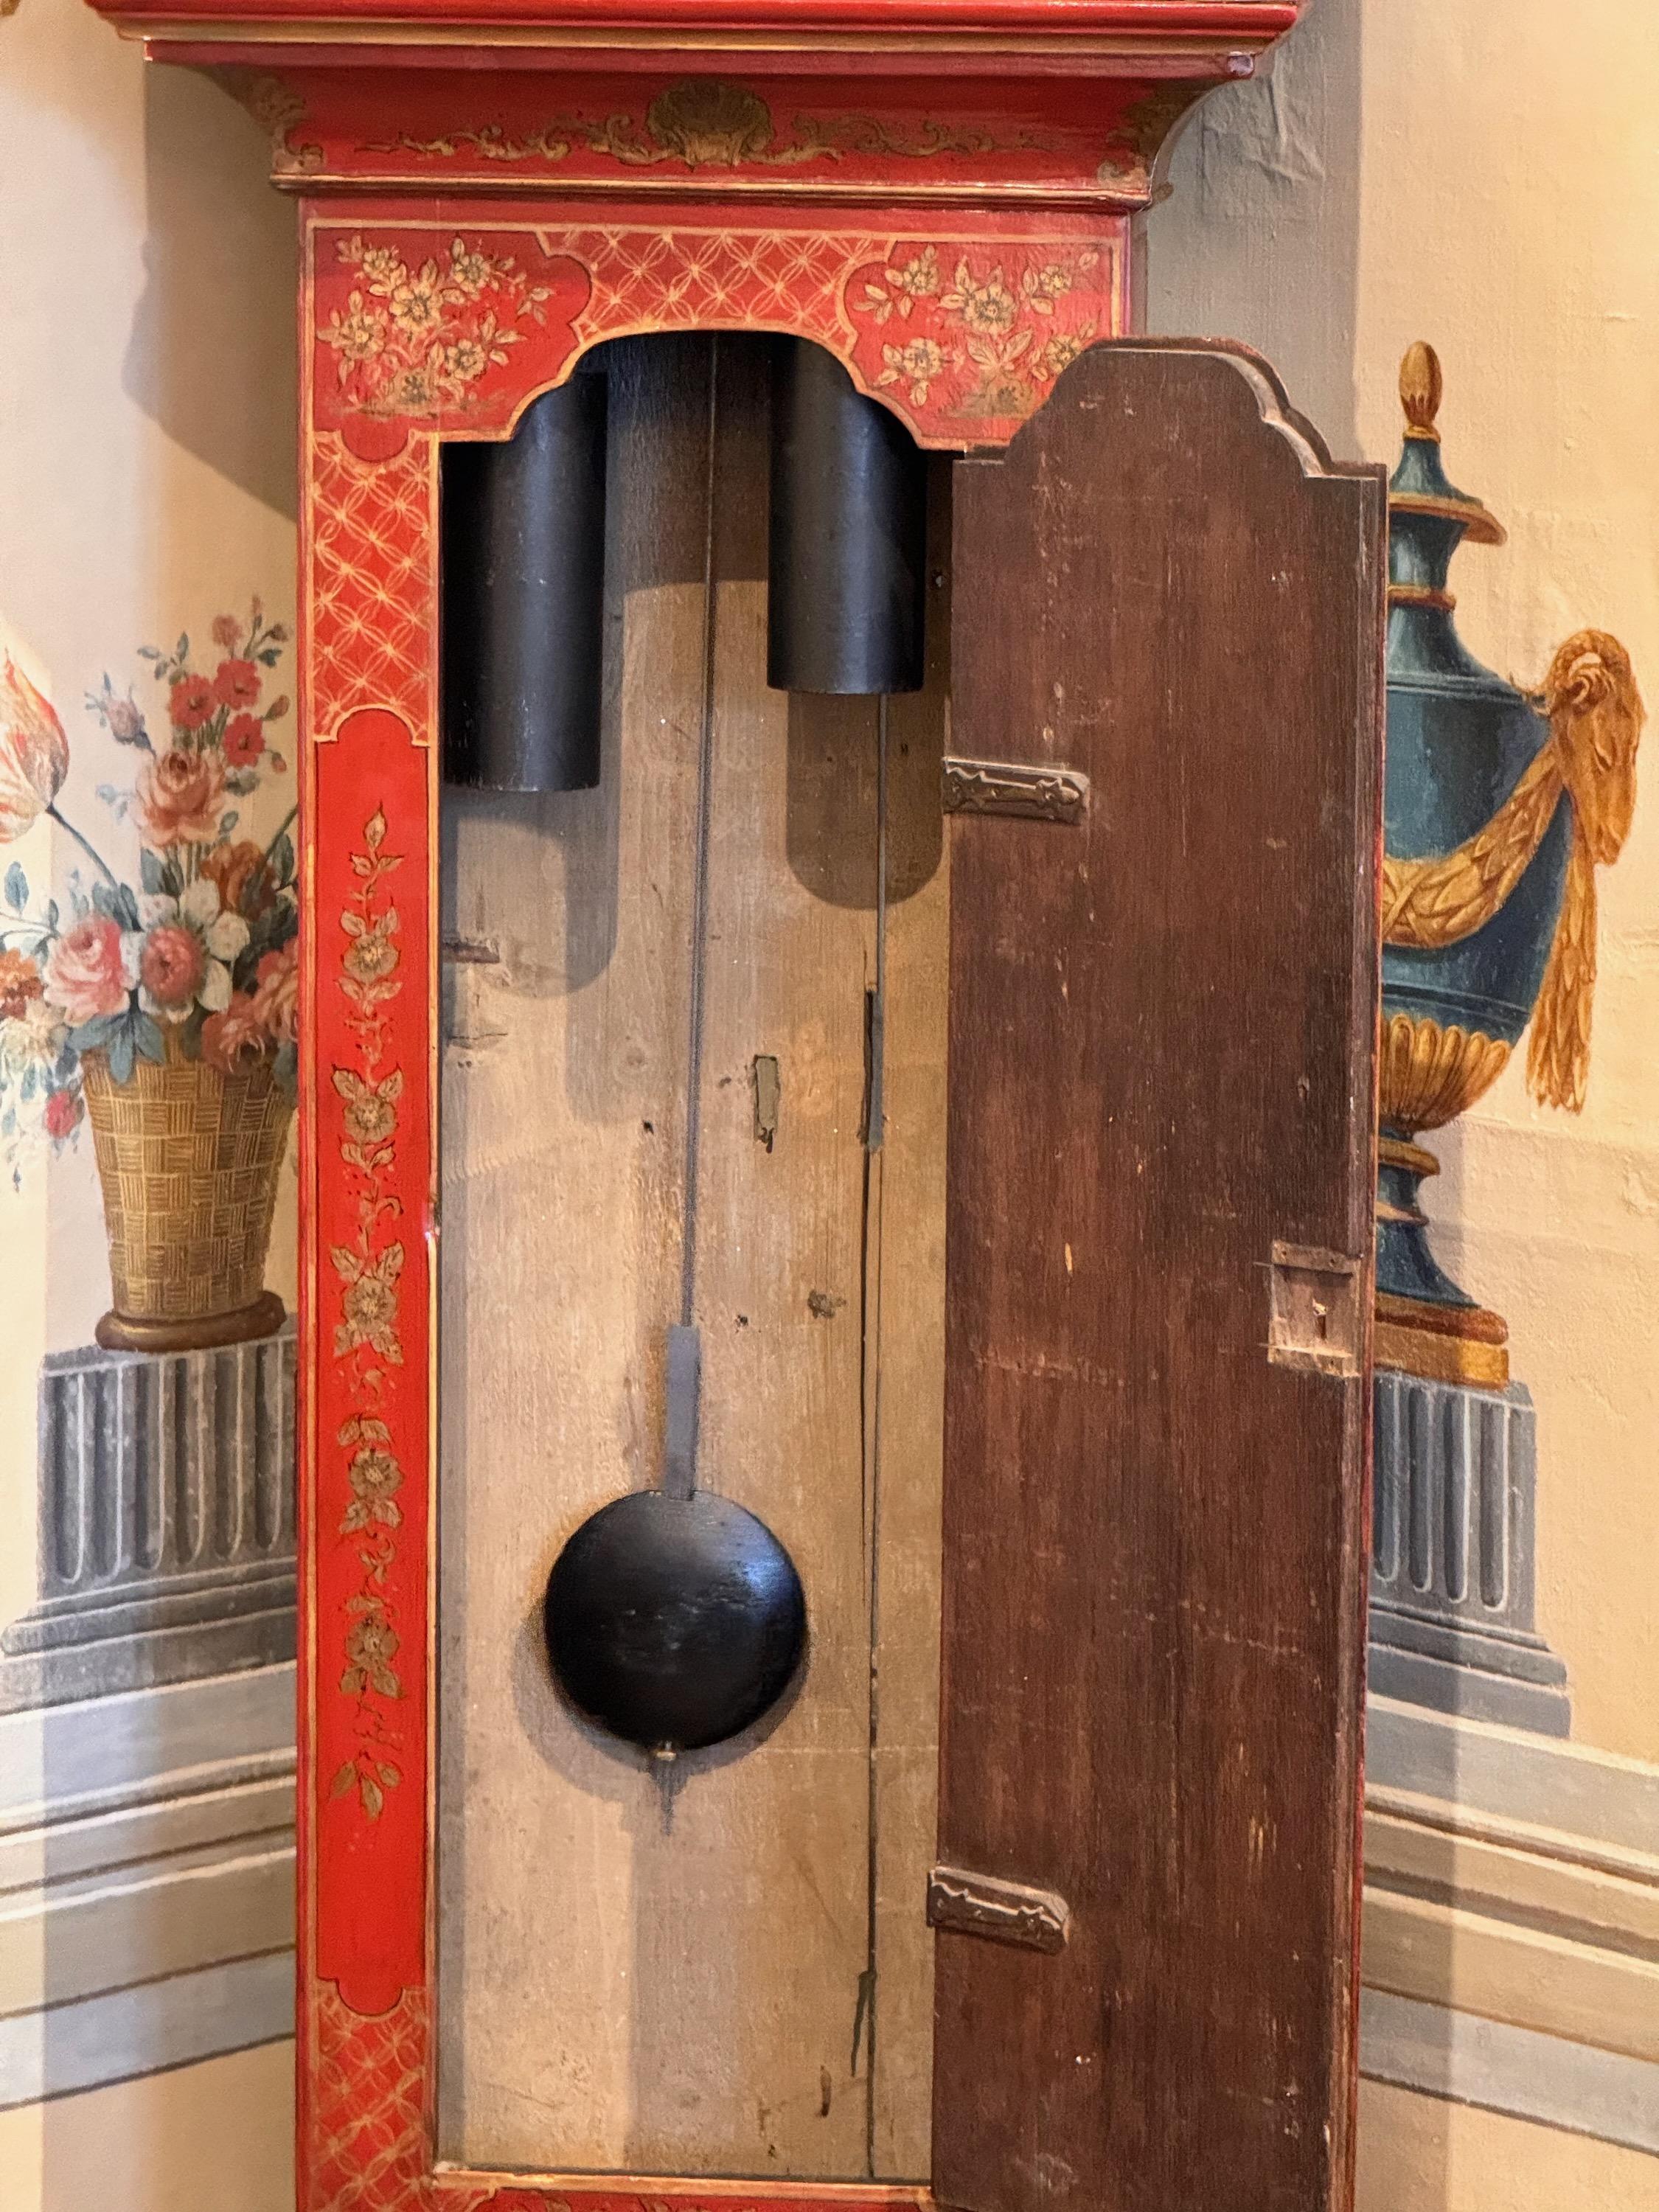 We love Chinoiserie. This is a beautiful red clock.